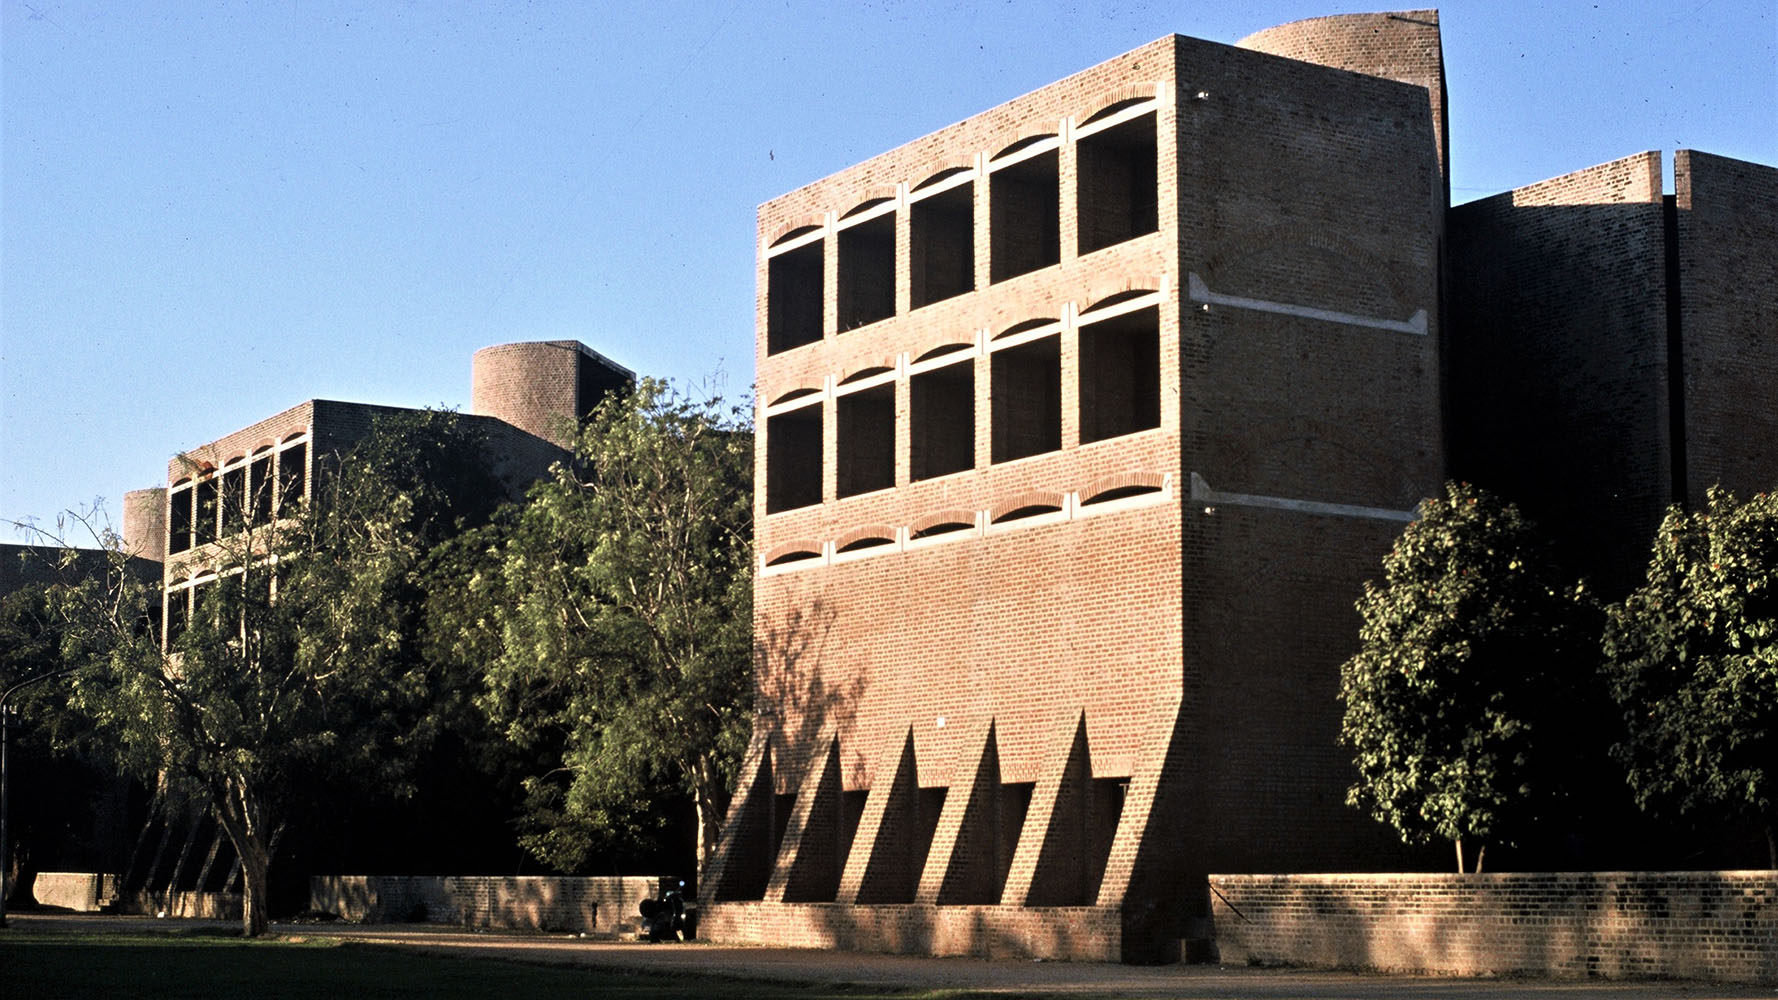 Commentary: To Be or Not To Be? Saving the Threatened Indian Institute of Management by Louis I. Kahn